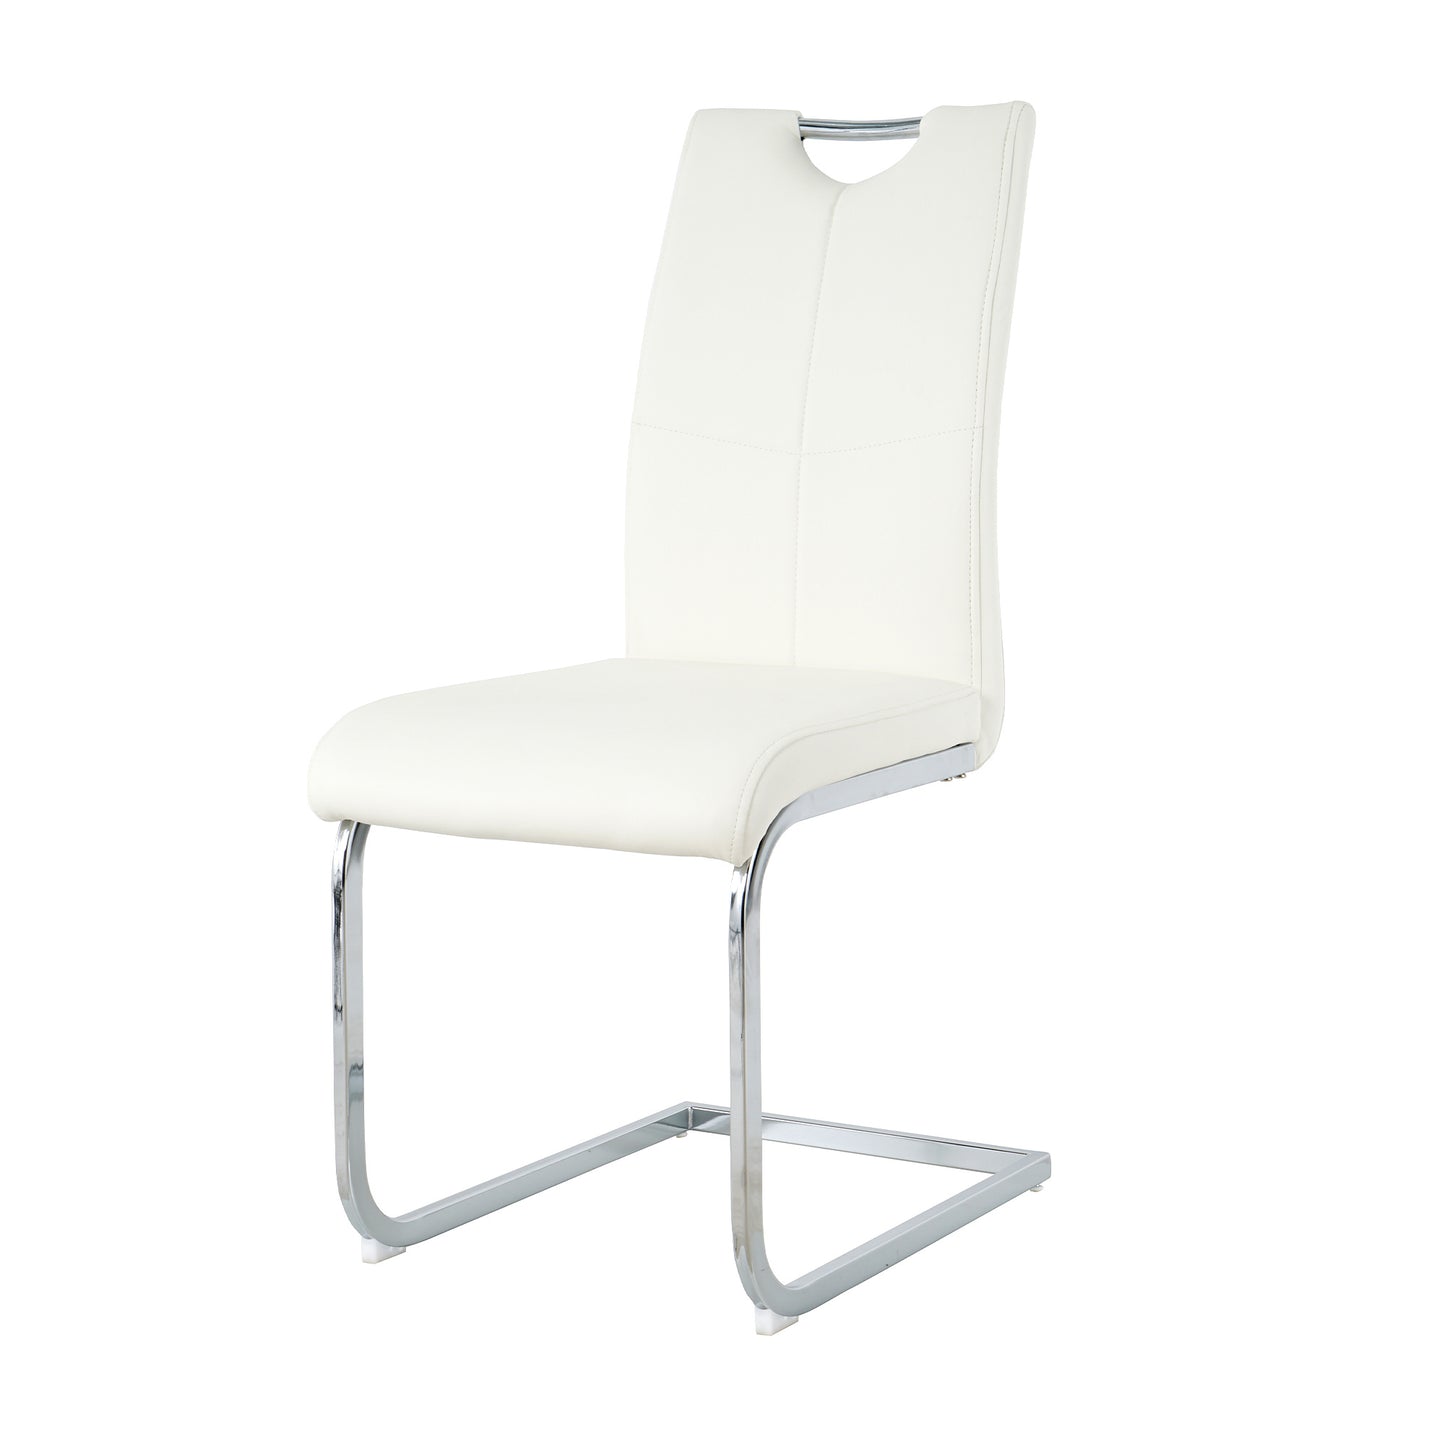 modern faux leather chairs set of 6, white